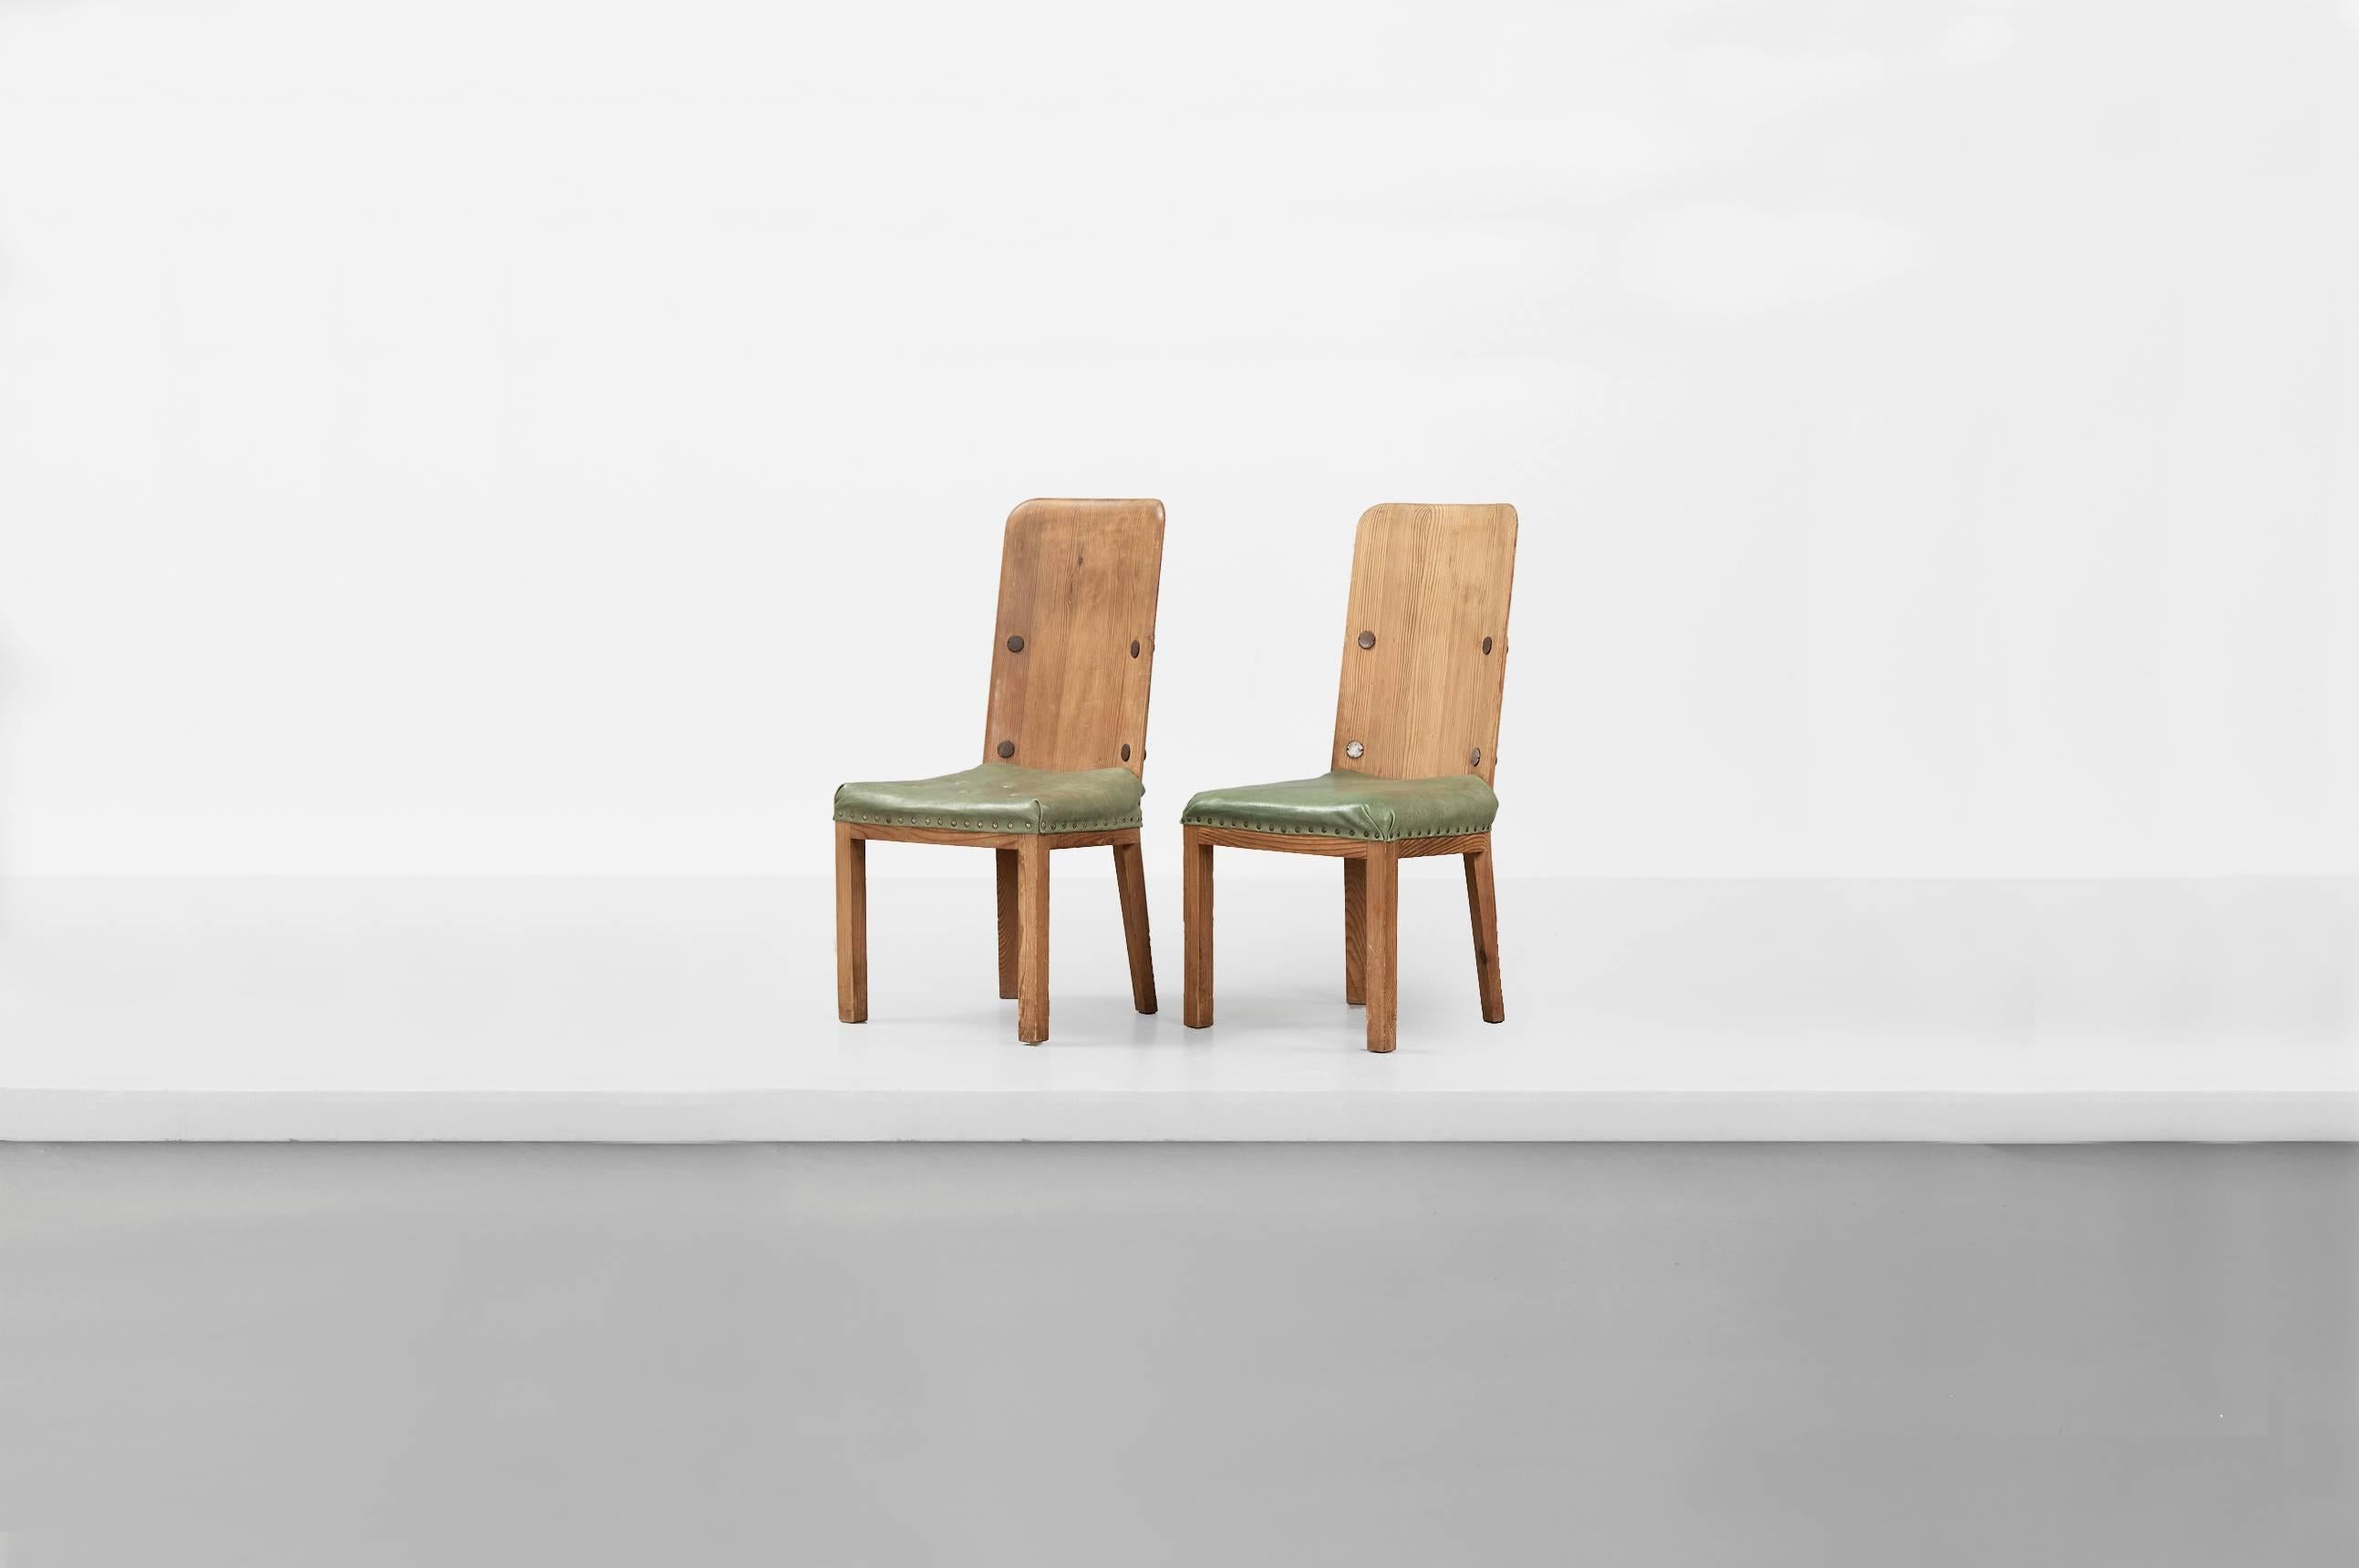 Axel Einar Hjorth (1888-1959).

Set of four high back dining chairs.
From the “Lovö” series.
Manufactured by AB Nordiska Kompaniet.
Sweden, 1932.
Pine wood, iron, fabric.
20th Century Swedish design 
Nordic design 


Measurements
50,7 cm x 47,5 cm